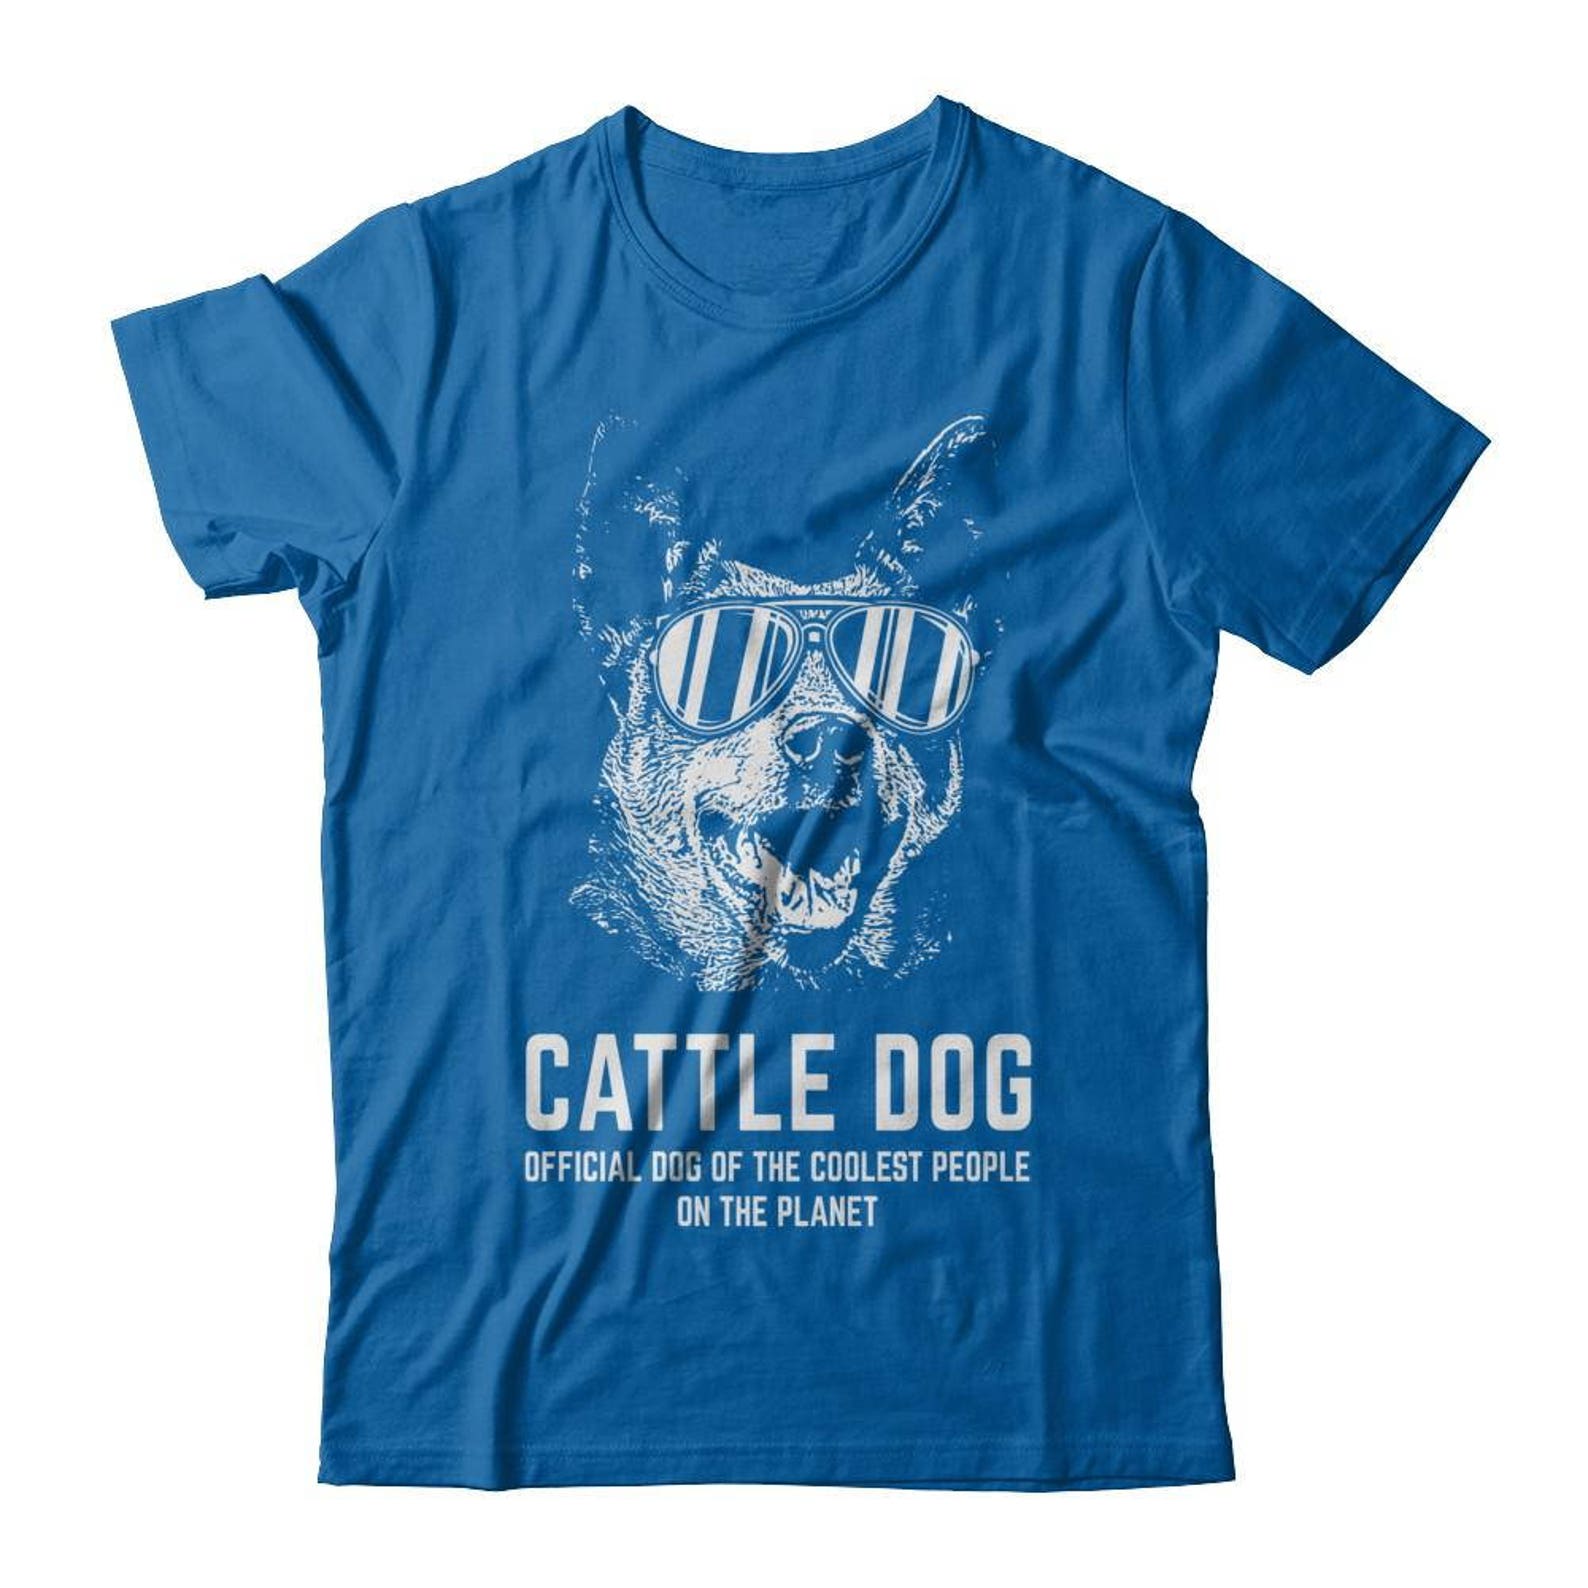 Cattle Dog Official Dog of the Coolest People on the Planet - Etsy